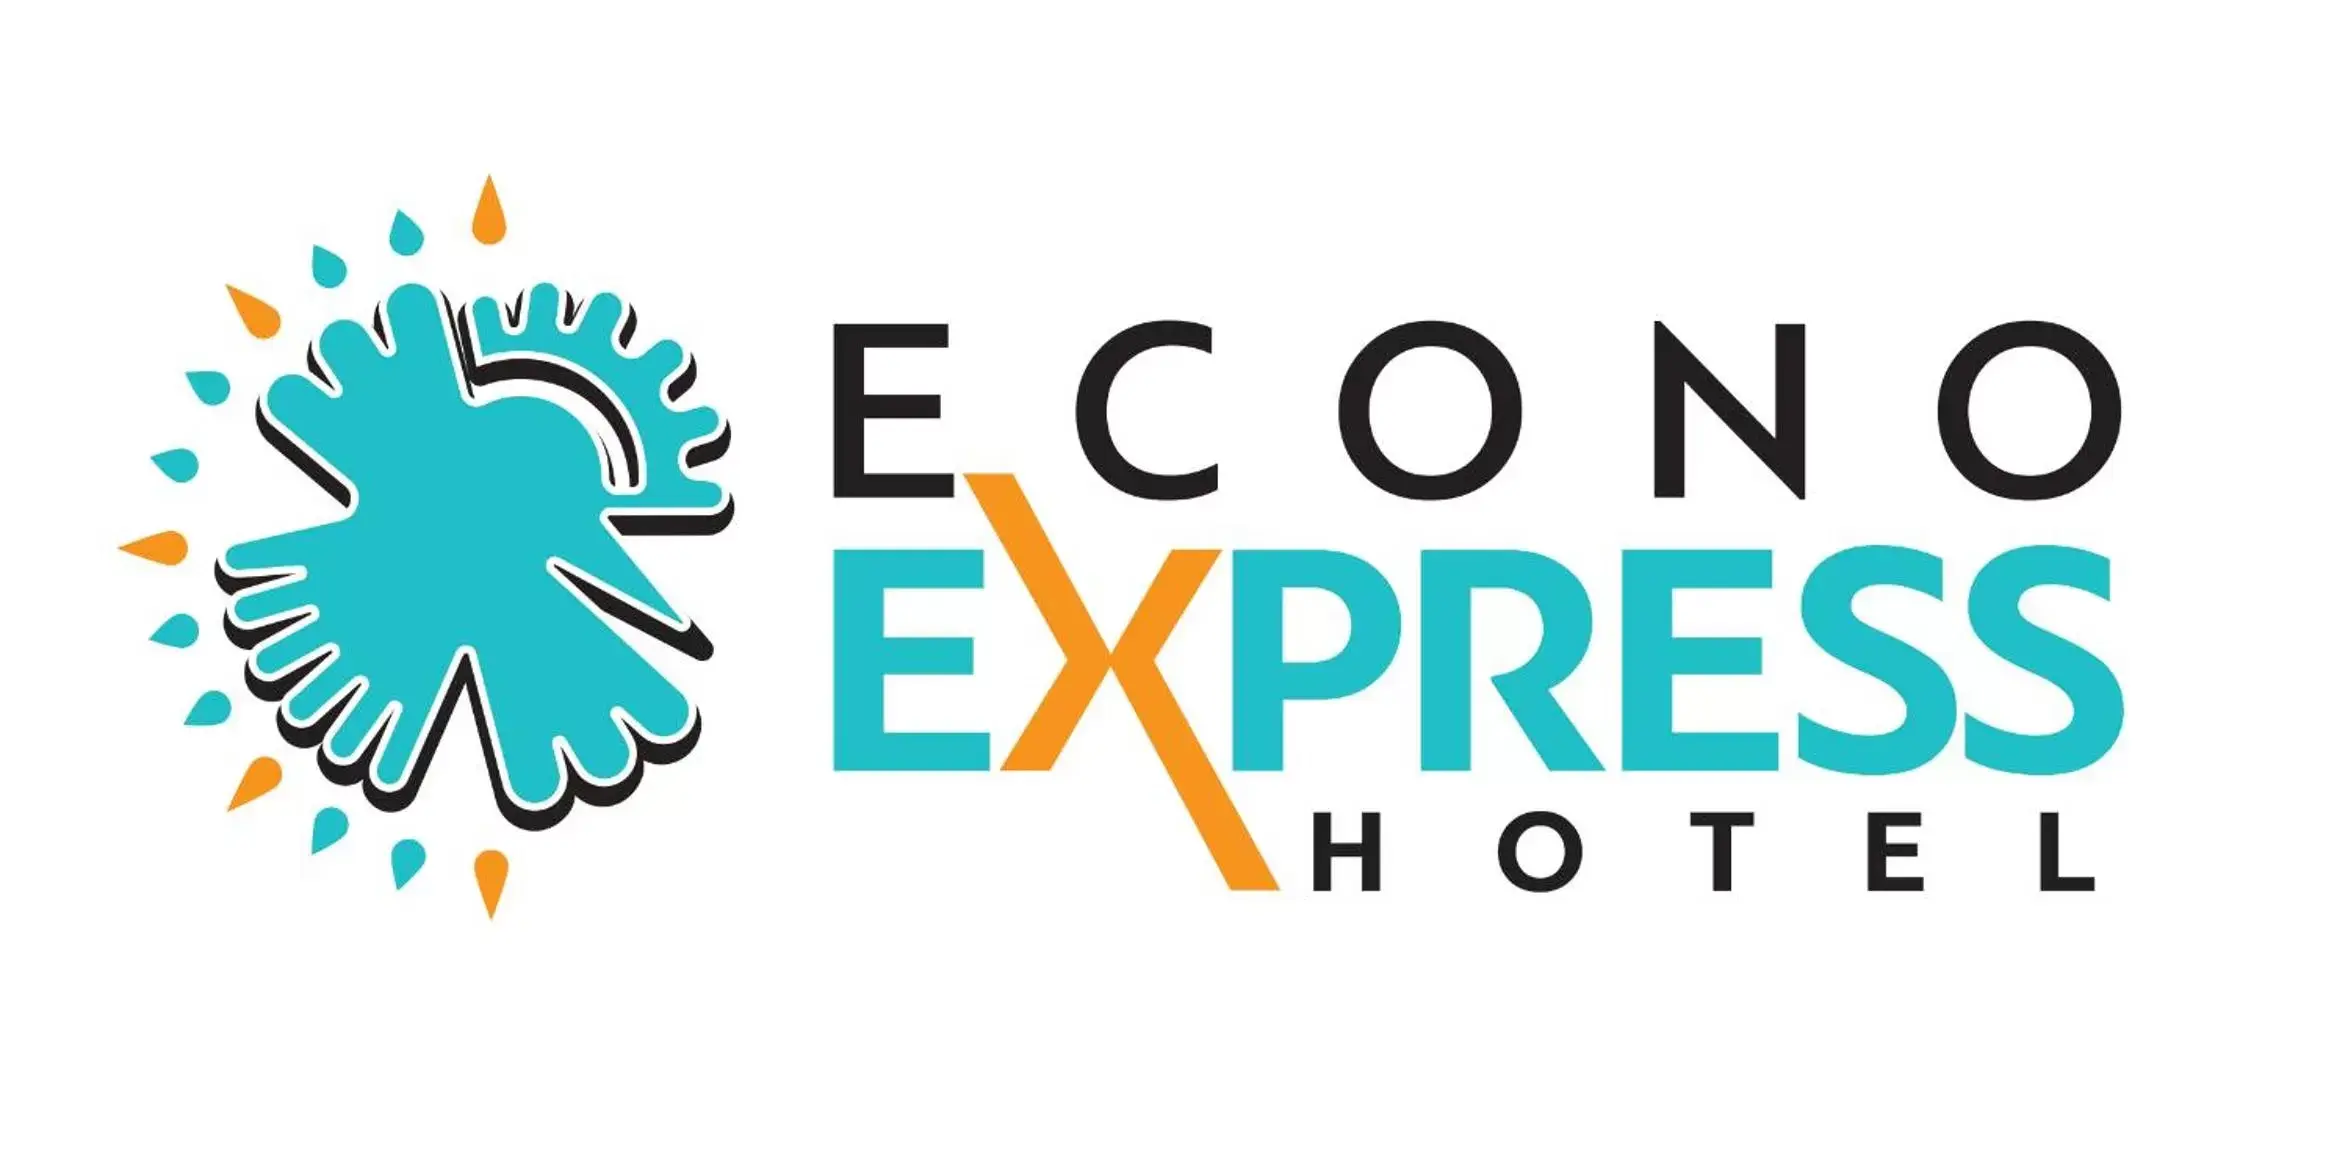 Property logo or sign in Econo Express Hotel